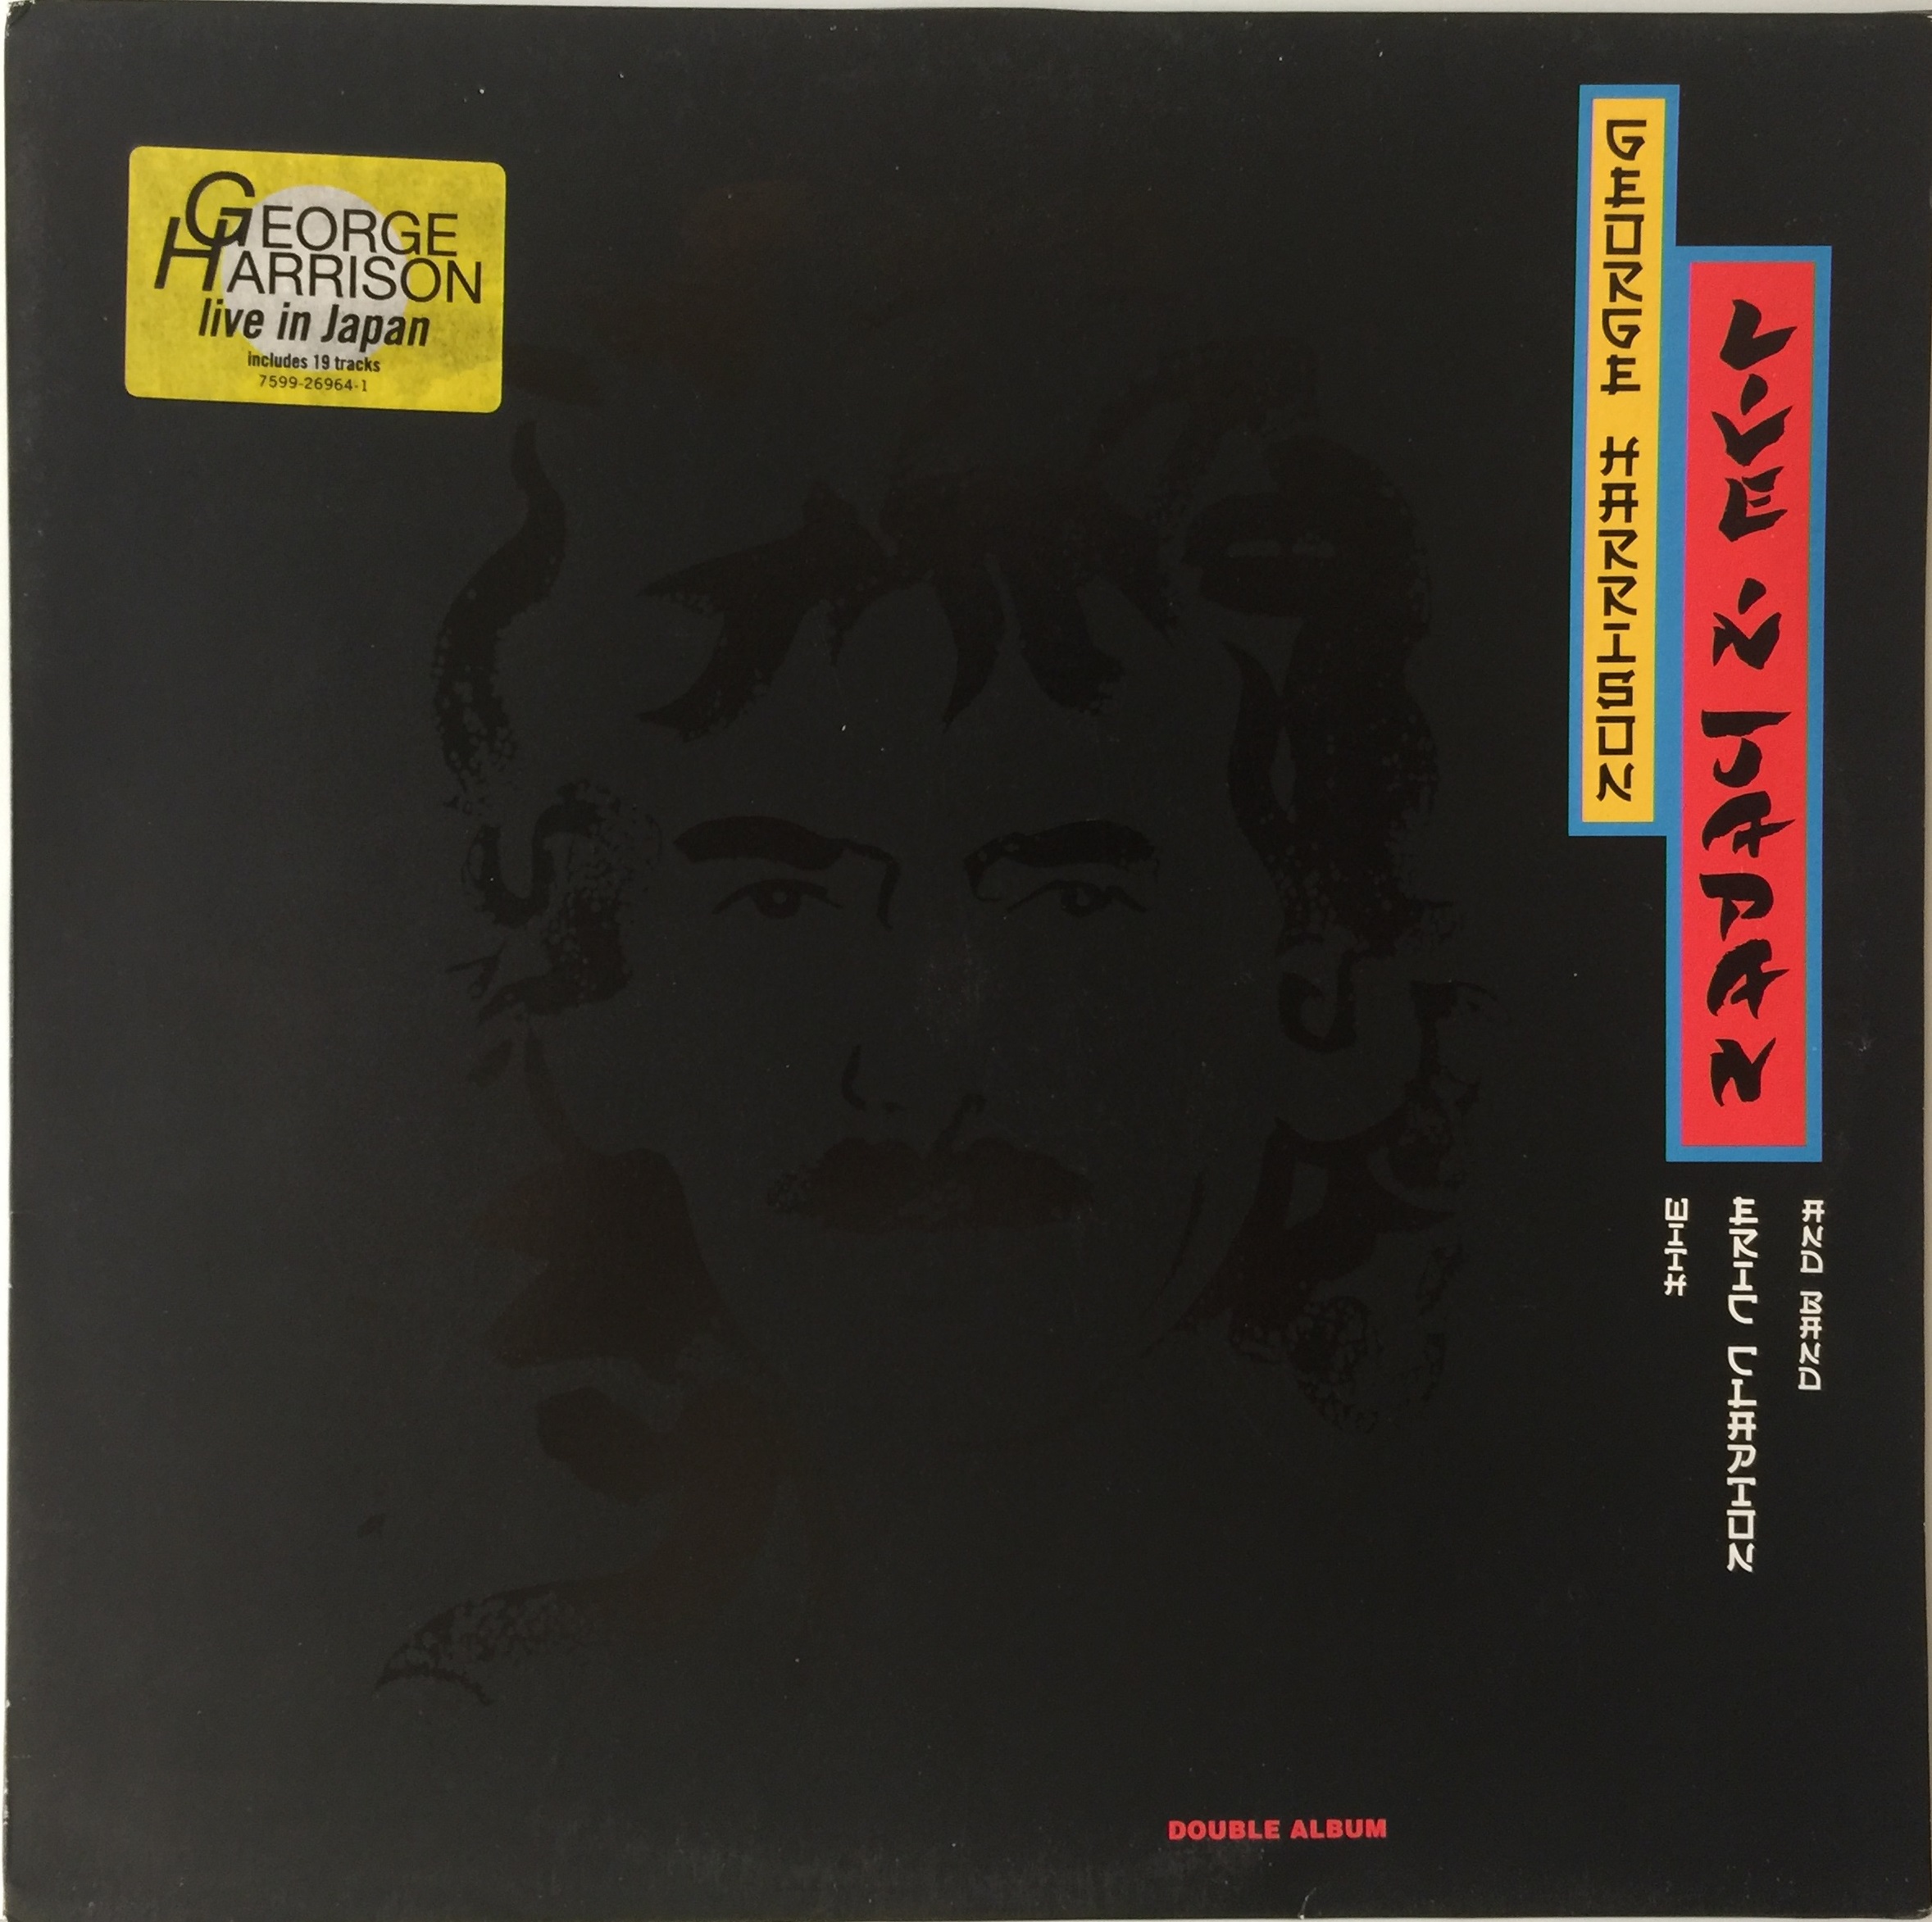 GEORGE HARRISON WITH ERIC CLAPTON AND BAND - LIVE IN JAPAN LP (ORIGINAL EU PRESSING - DARK